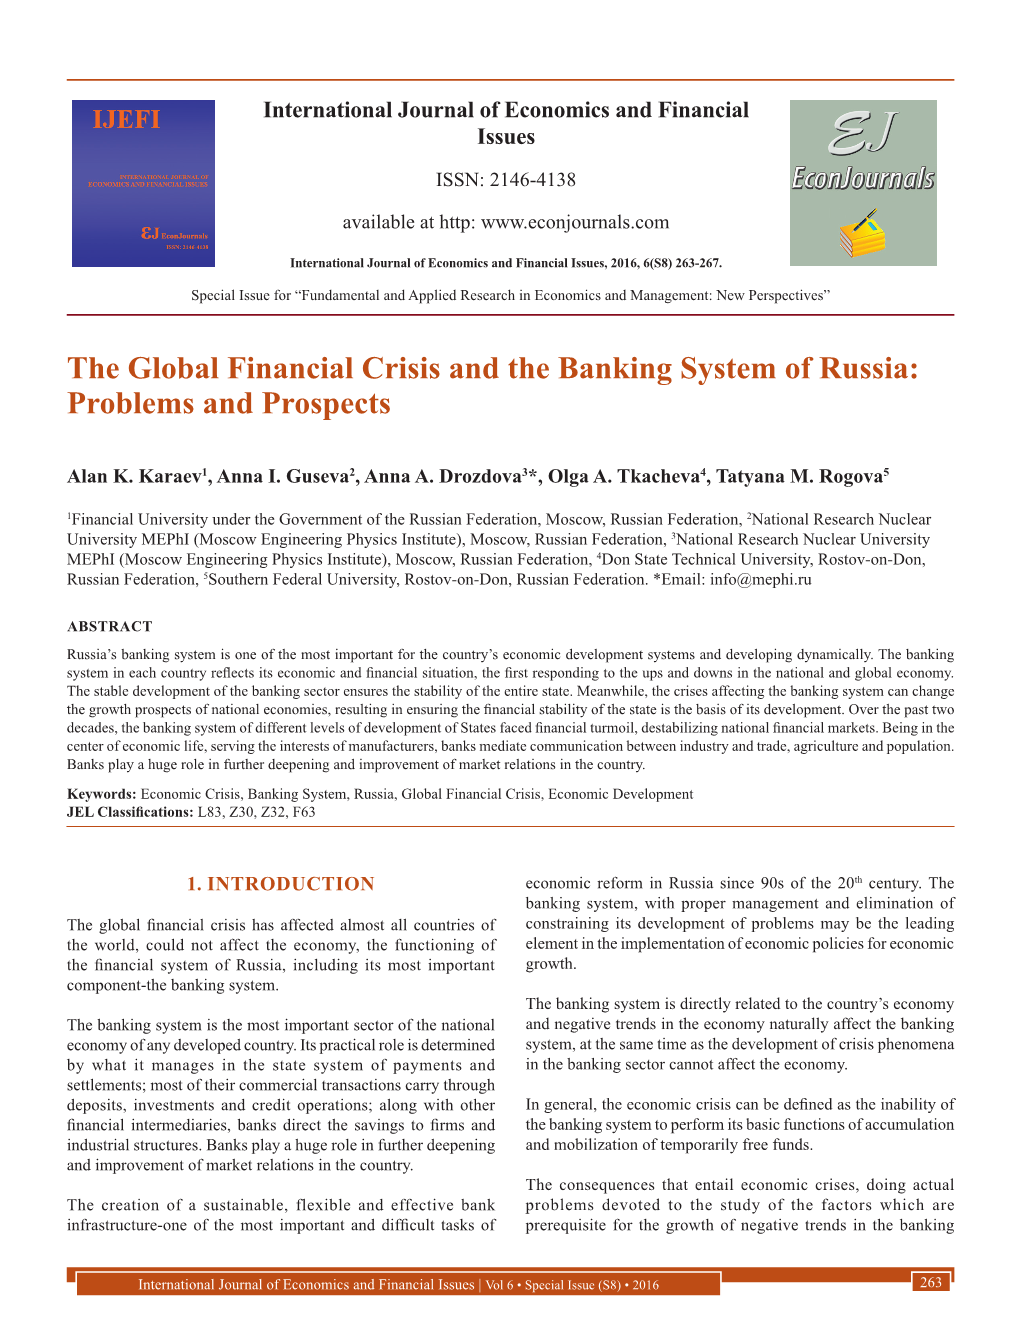 The Global Financial Crisis and the Banking System of Russia: Problems and Prospects